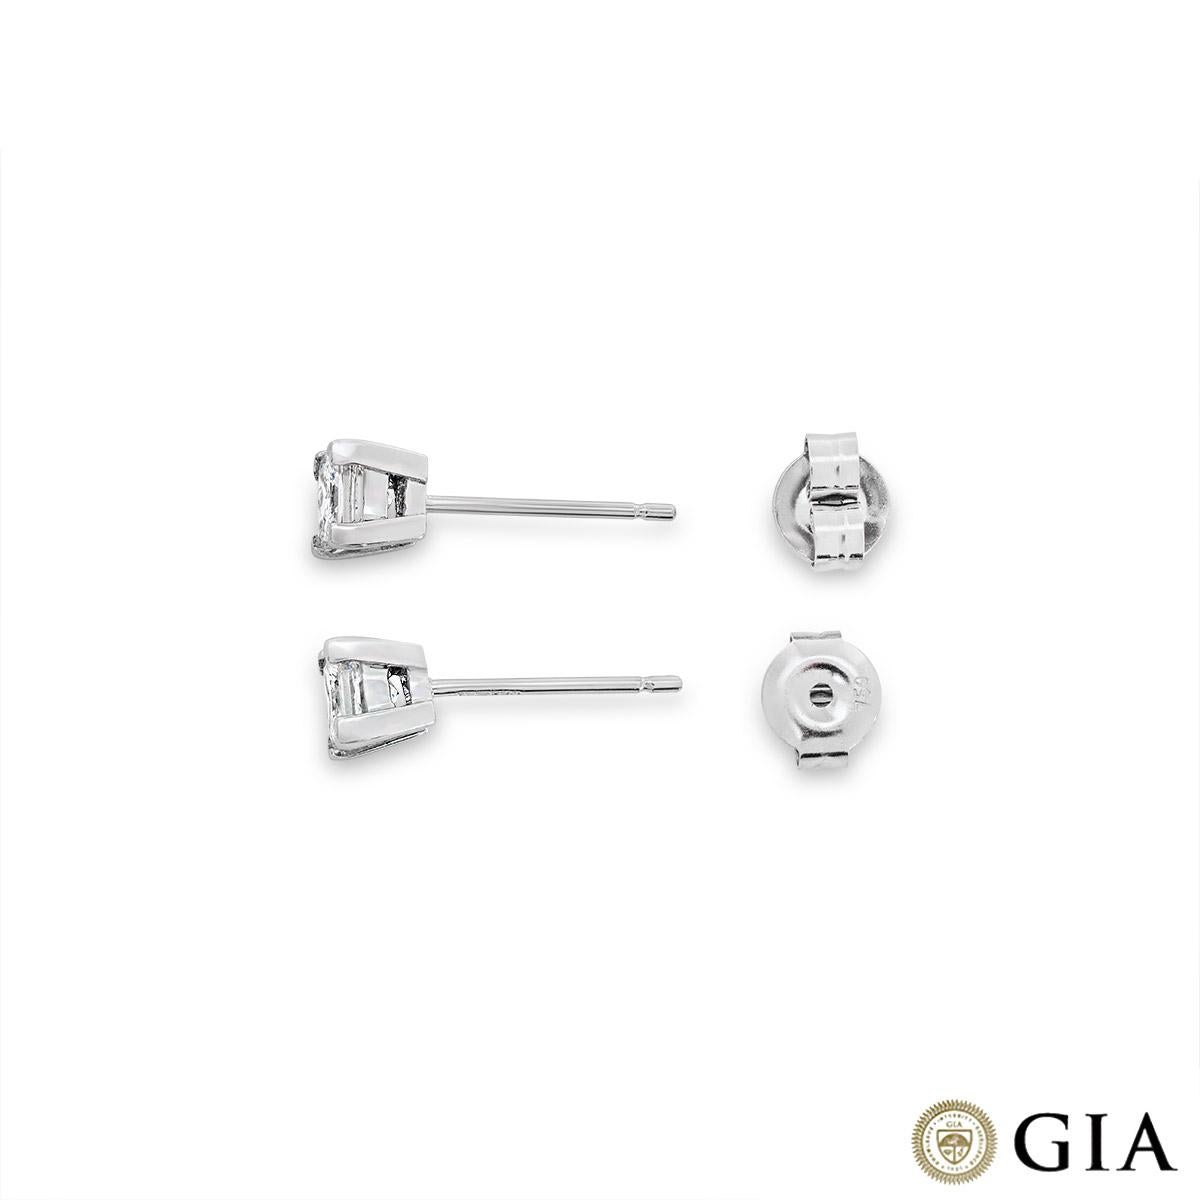 GIA Certified White Gold Princess Cut Diamond Earrings 1.01ct TDW In Excellent Condition For Sale In London, GB